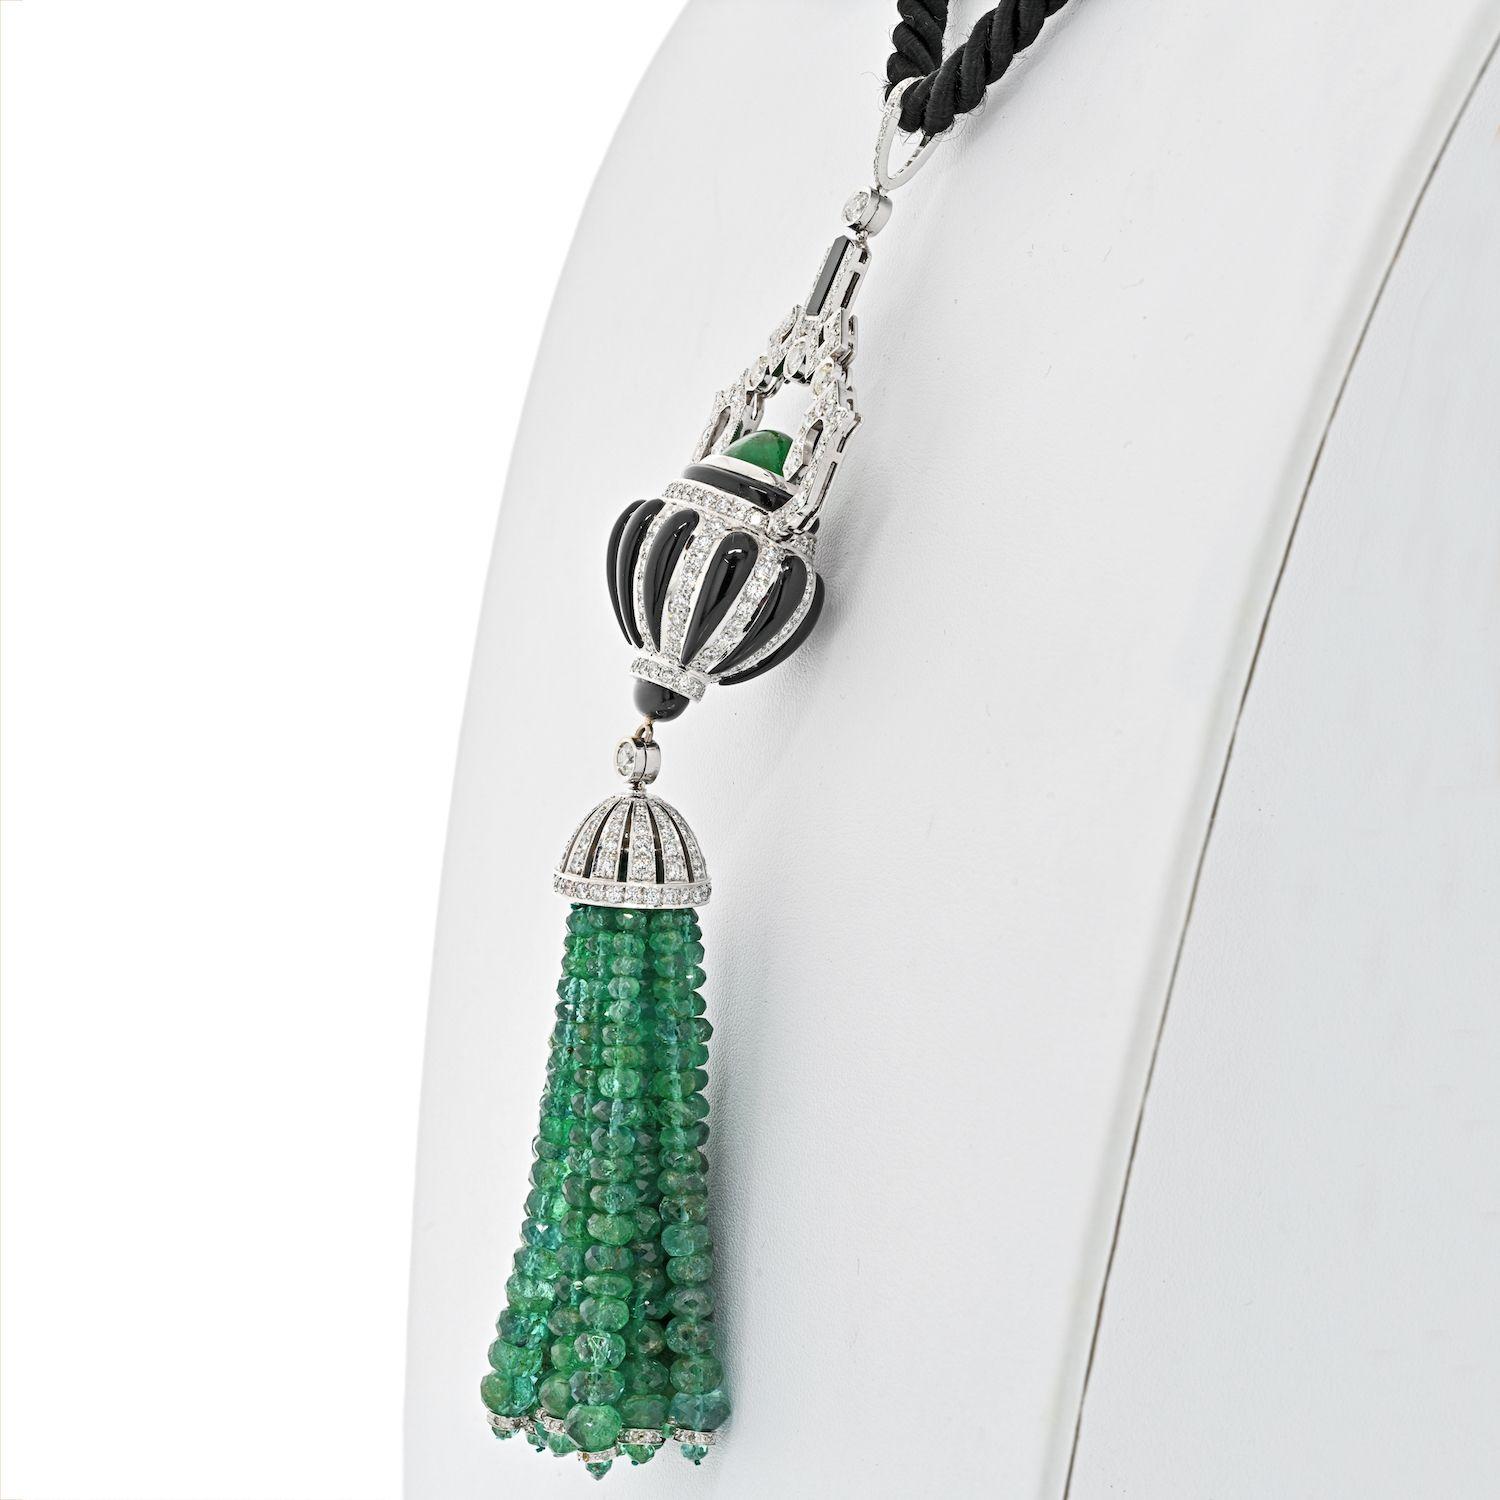 This fine 18k white gold necklace on a black cord features all natural emerald beads, diamonds and onyx accents made in a shape of a tassel. Styled in Art Deco fashion this tassel necklace is in excellent condition. Measures about 4 inches long,